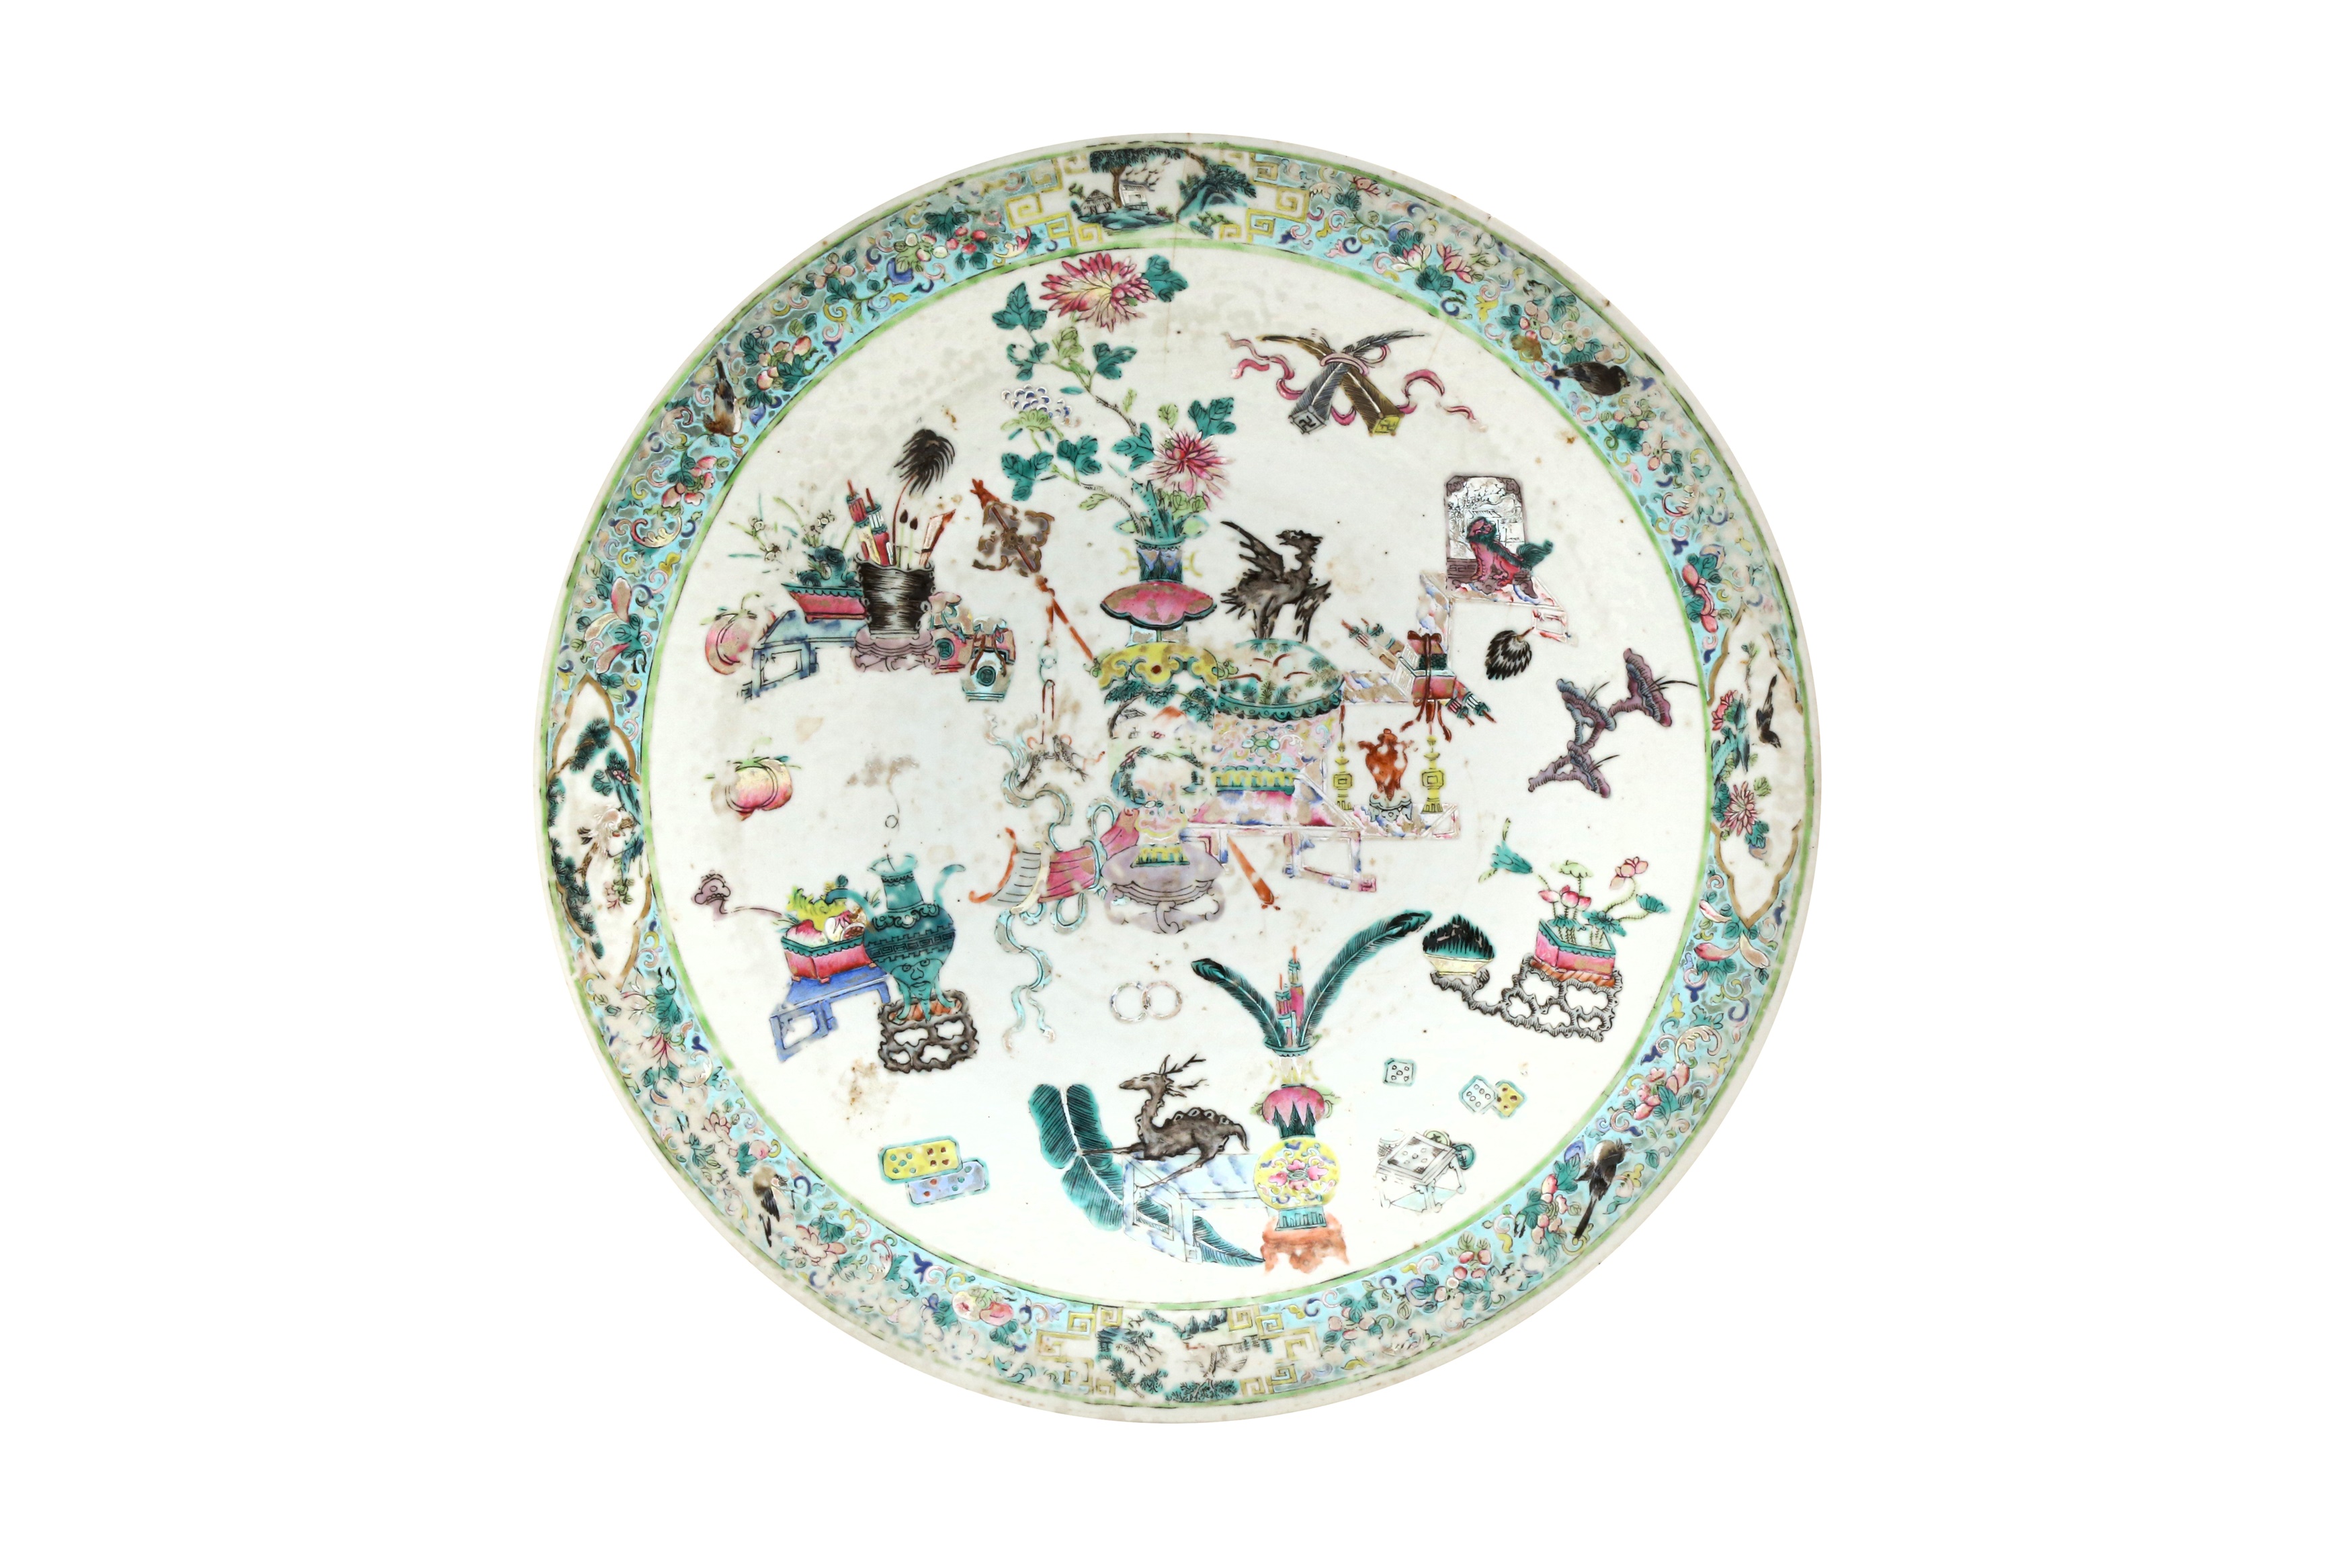 A LARGE CHINESE FAMILLE-ROSE 'HUNDRED ANTIQUES' CHARGER 清十九世紀 粉彩博古圖紋大盤